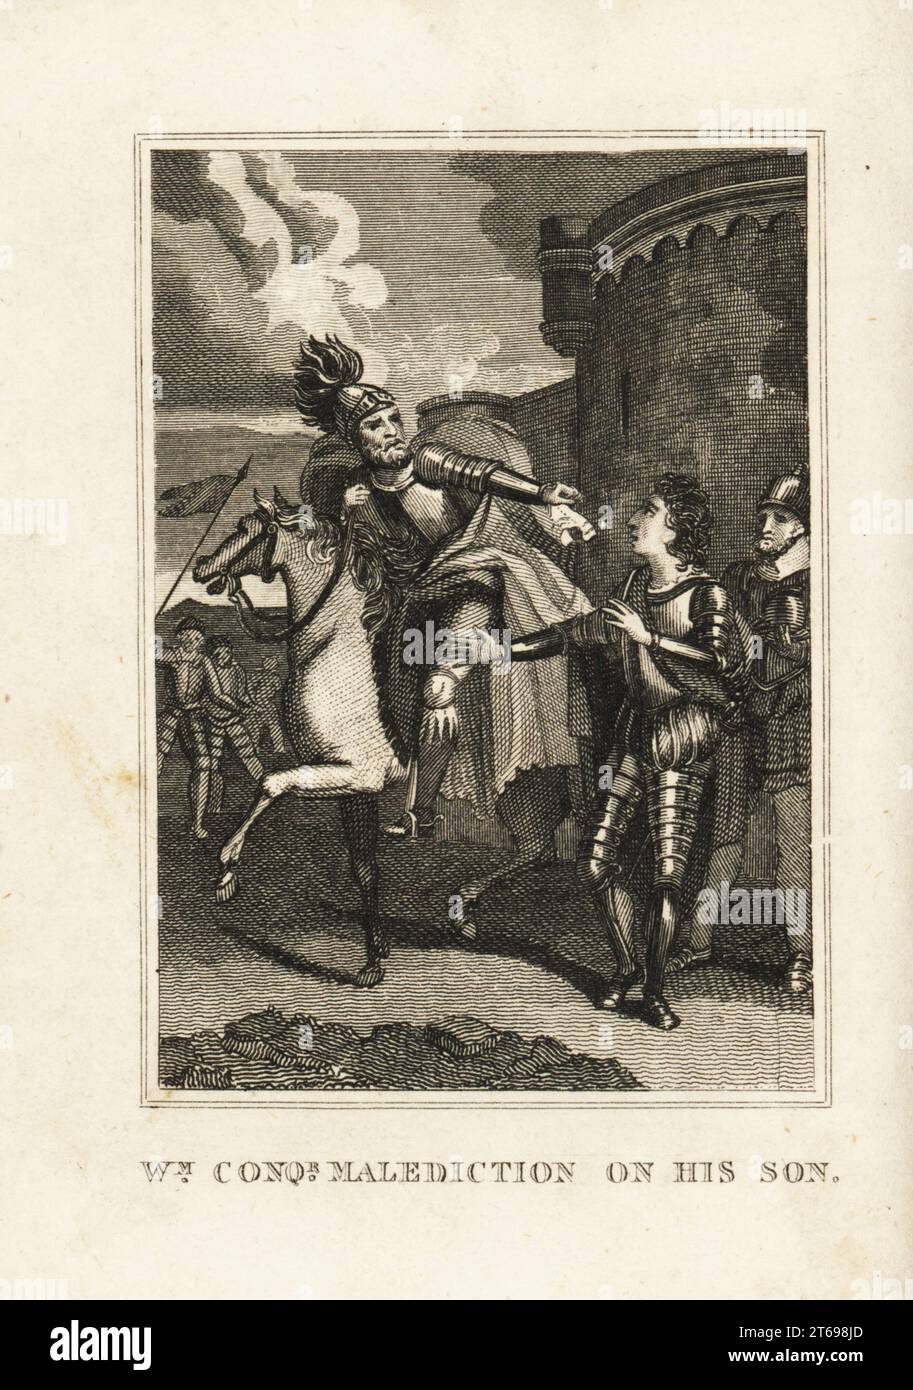 King WIlliam I of England cursing his son Robert Curthose at the Siege of Gerberoy Fortress, 1079. William the Conqueror's malediction of his son. Copperplate engraving from M. A. Jones History of England from Julius Caesar to George IV, G. Virtue, 26 Ivy Lane, London, 1836. Stock Photo